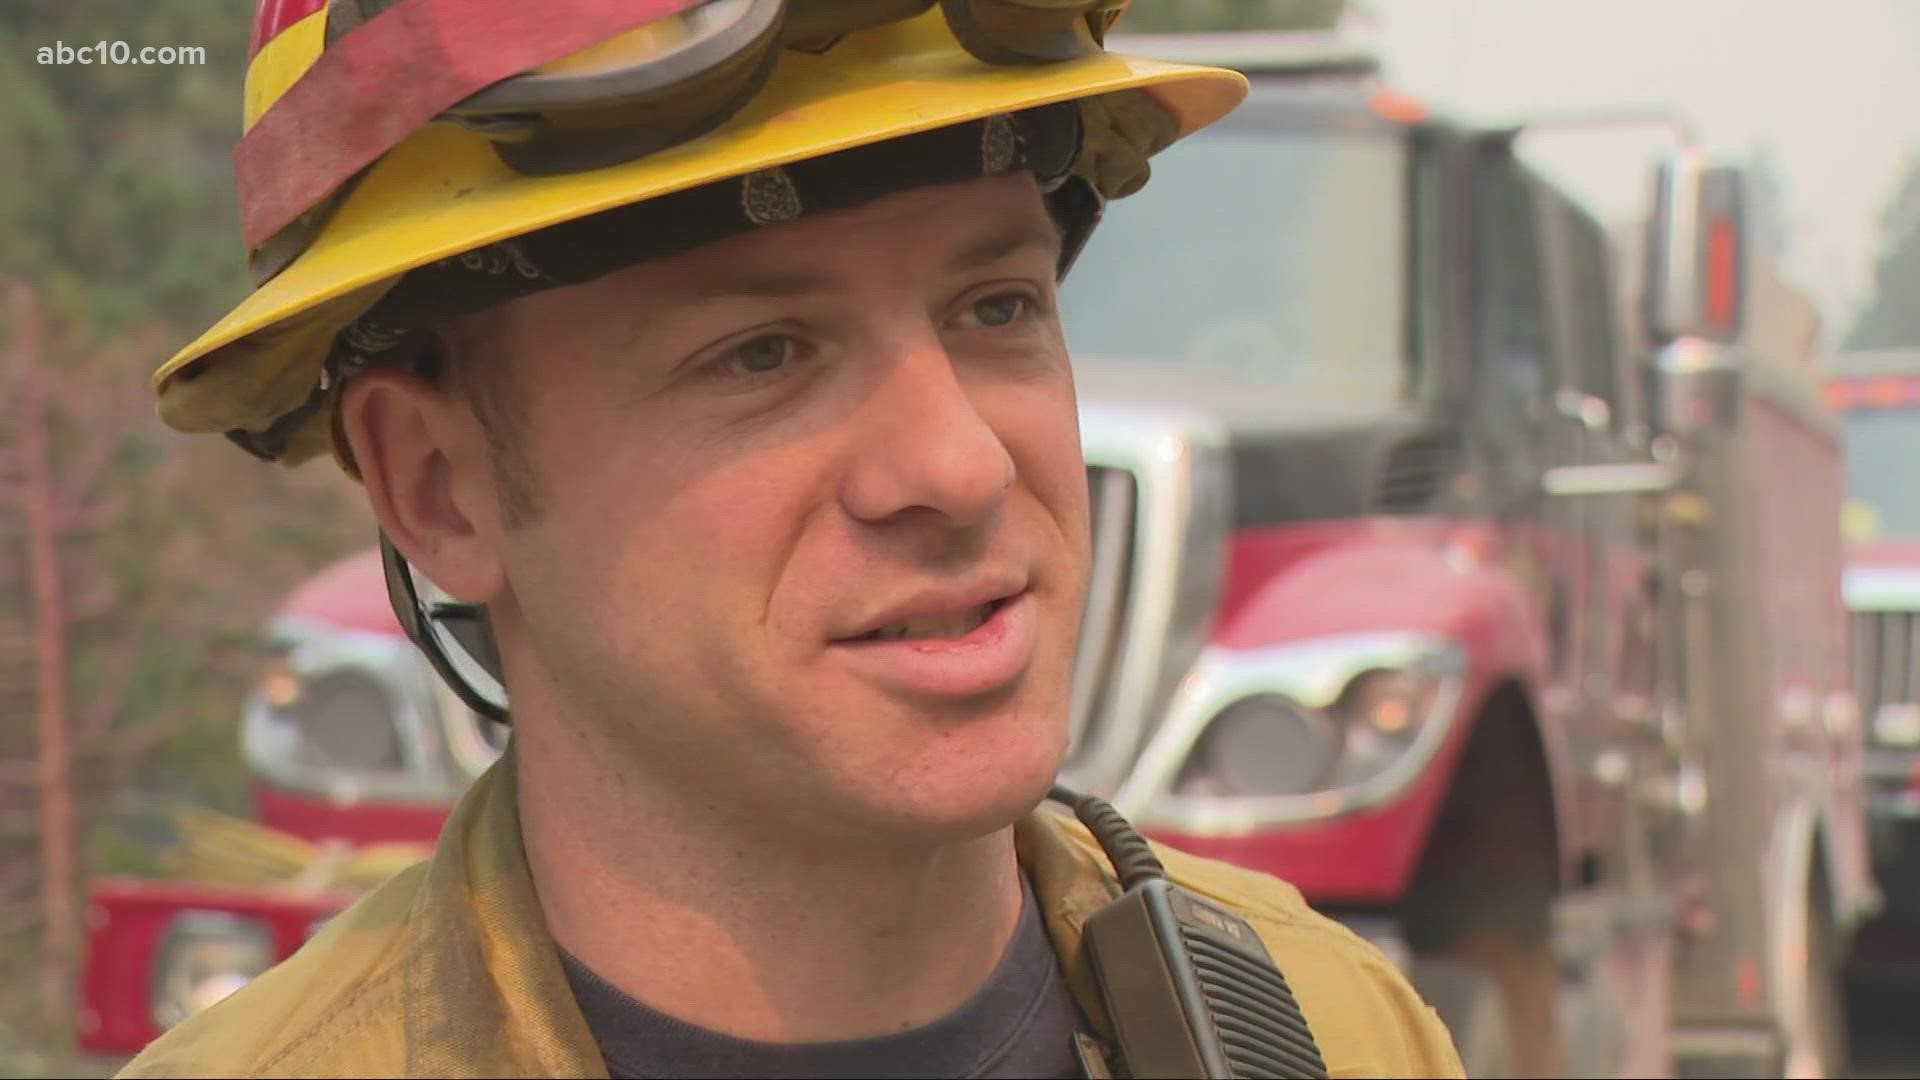 Although the California wildfires have forced people to evacuate their homes, they remain grateful for the work firefighters are putting in to stop the fire.